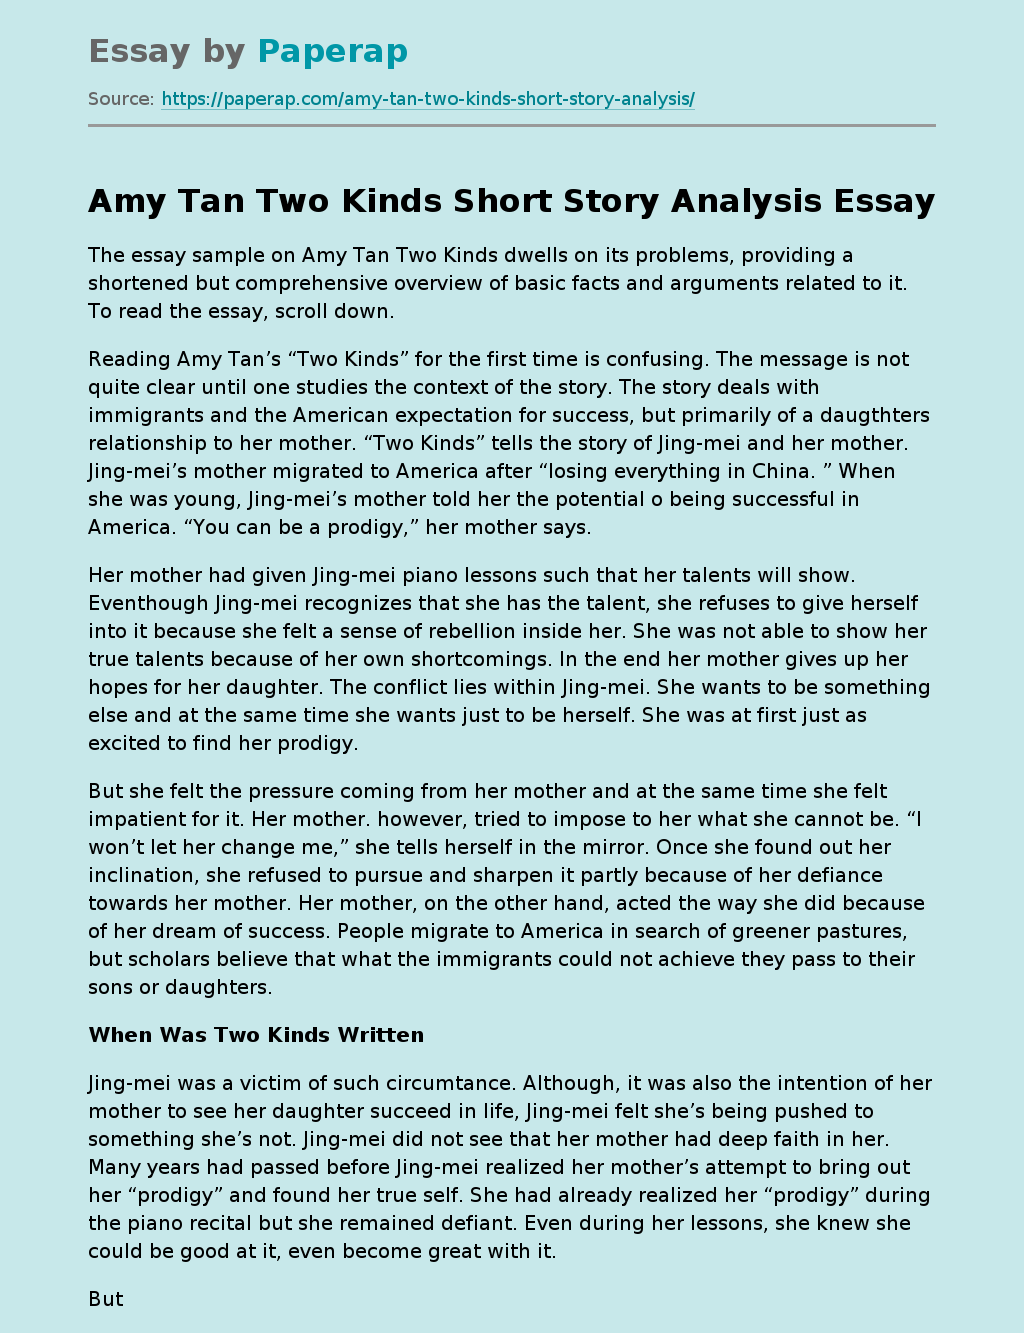 Amy Tan Two Kinds Short Story Analysis